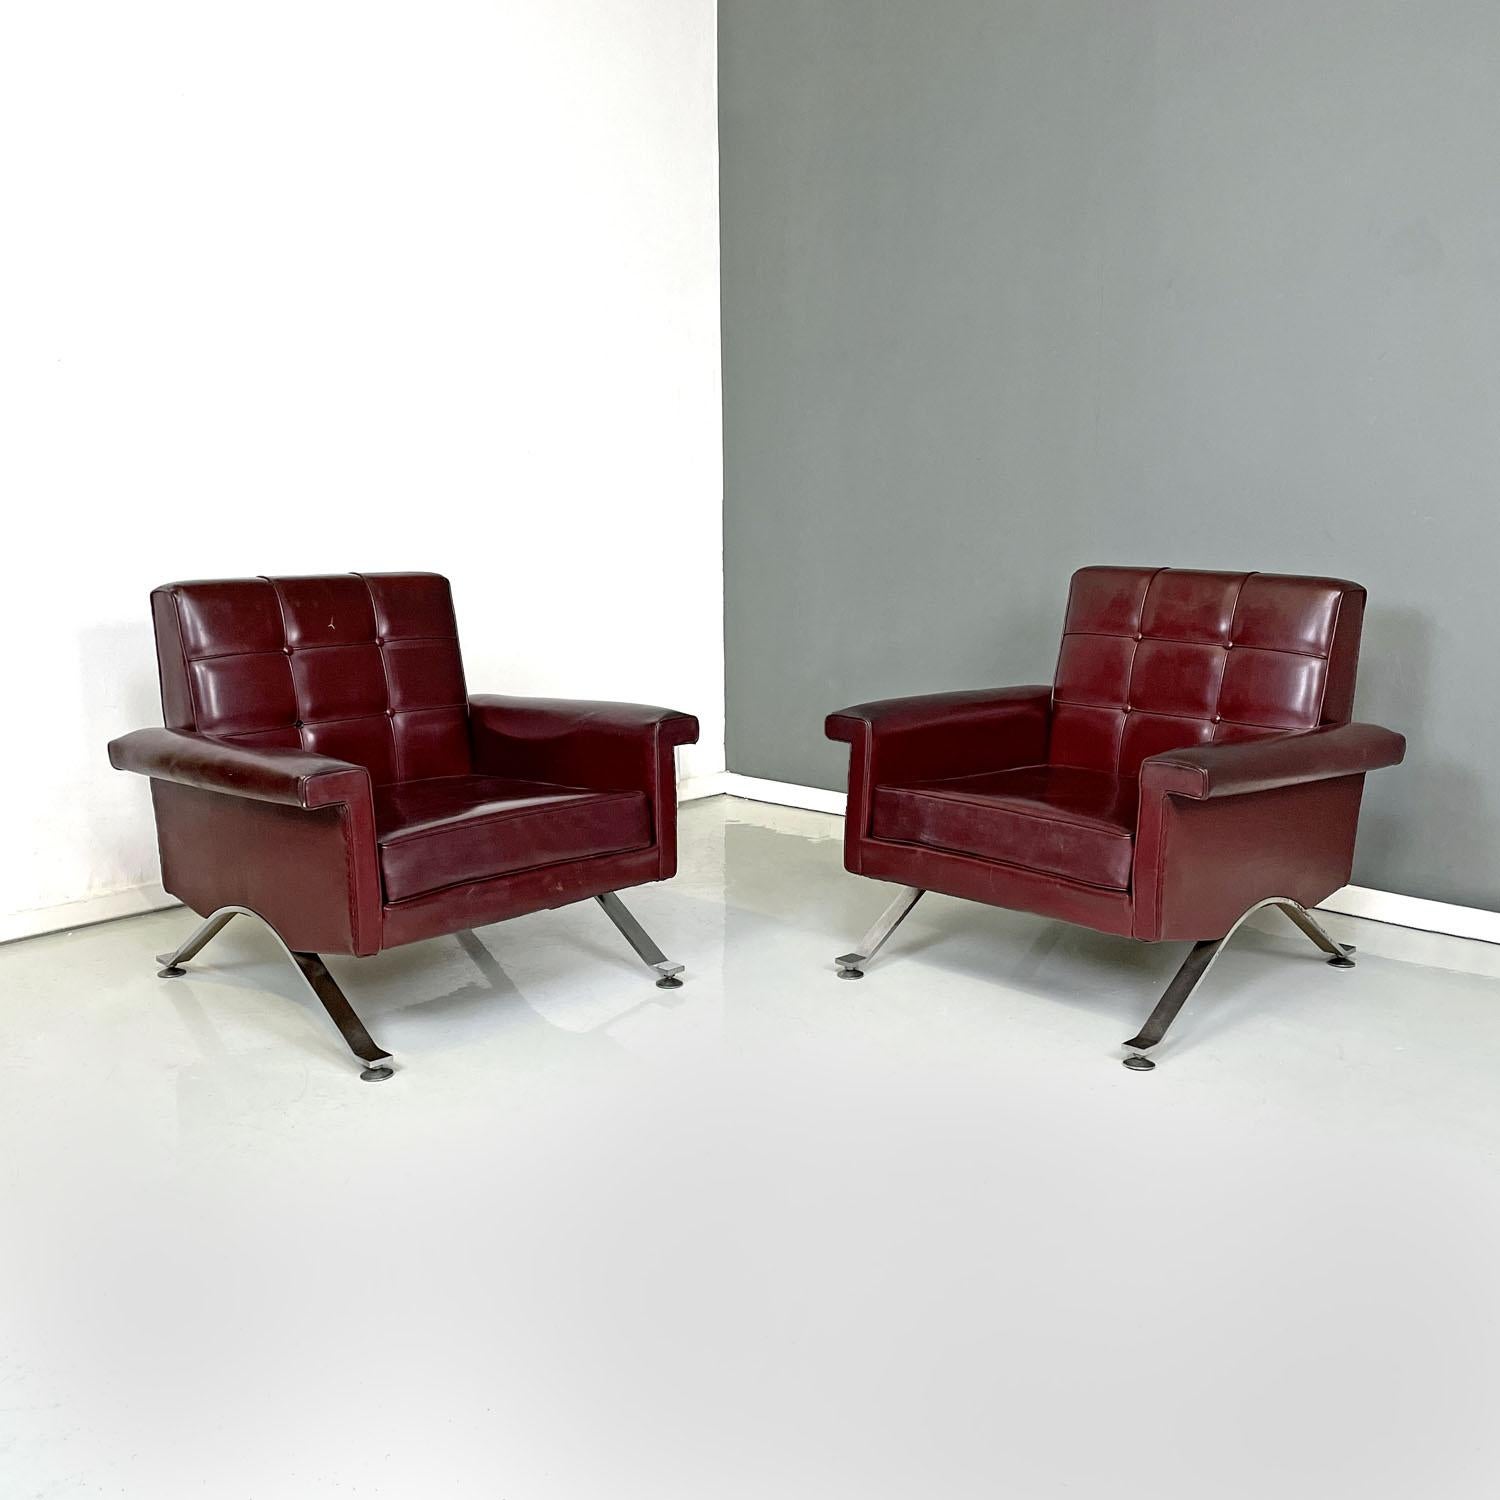 Italian mid-century modern leather armchairs by Ico Parisi for Cassina, 1960s
Pair of dark burgundy leather armchairs. The seat, the backrest with buttons and the armrests have very linear and squared shapes. The legs are in chromed steel and have